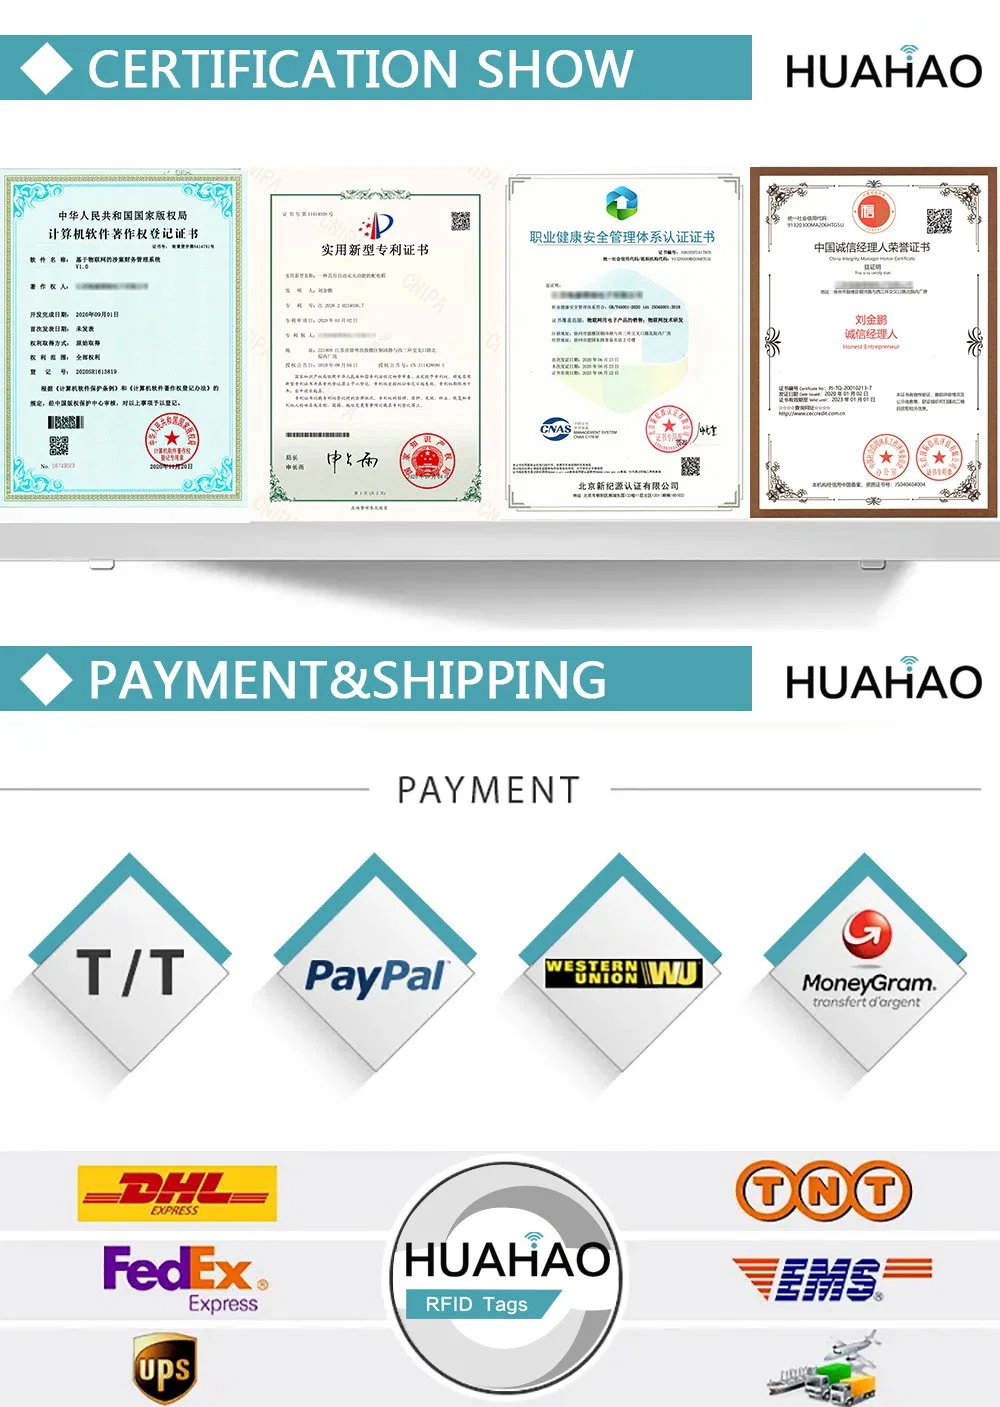 Free Sample! Huahao RFID Manufacturer Customized 860-960MHz Label RFID Tag